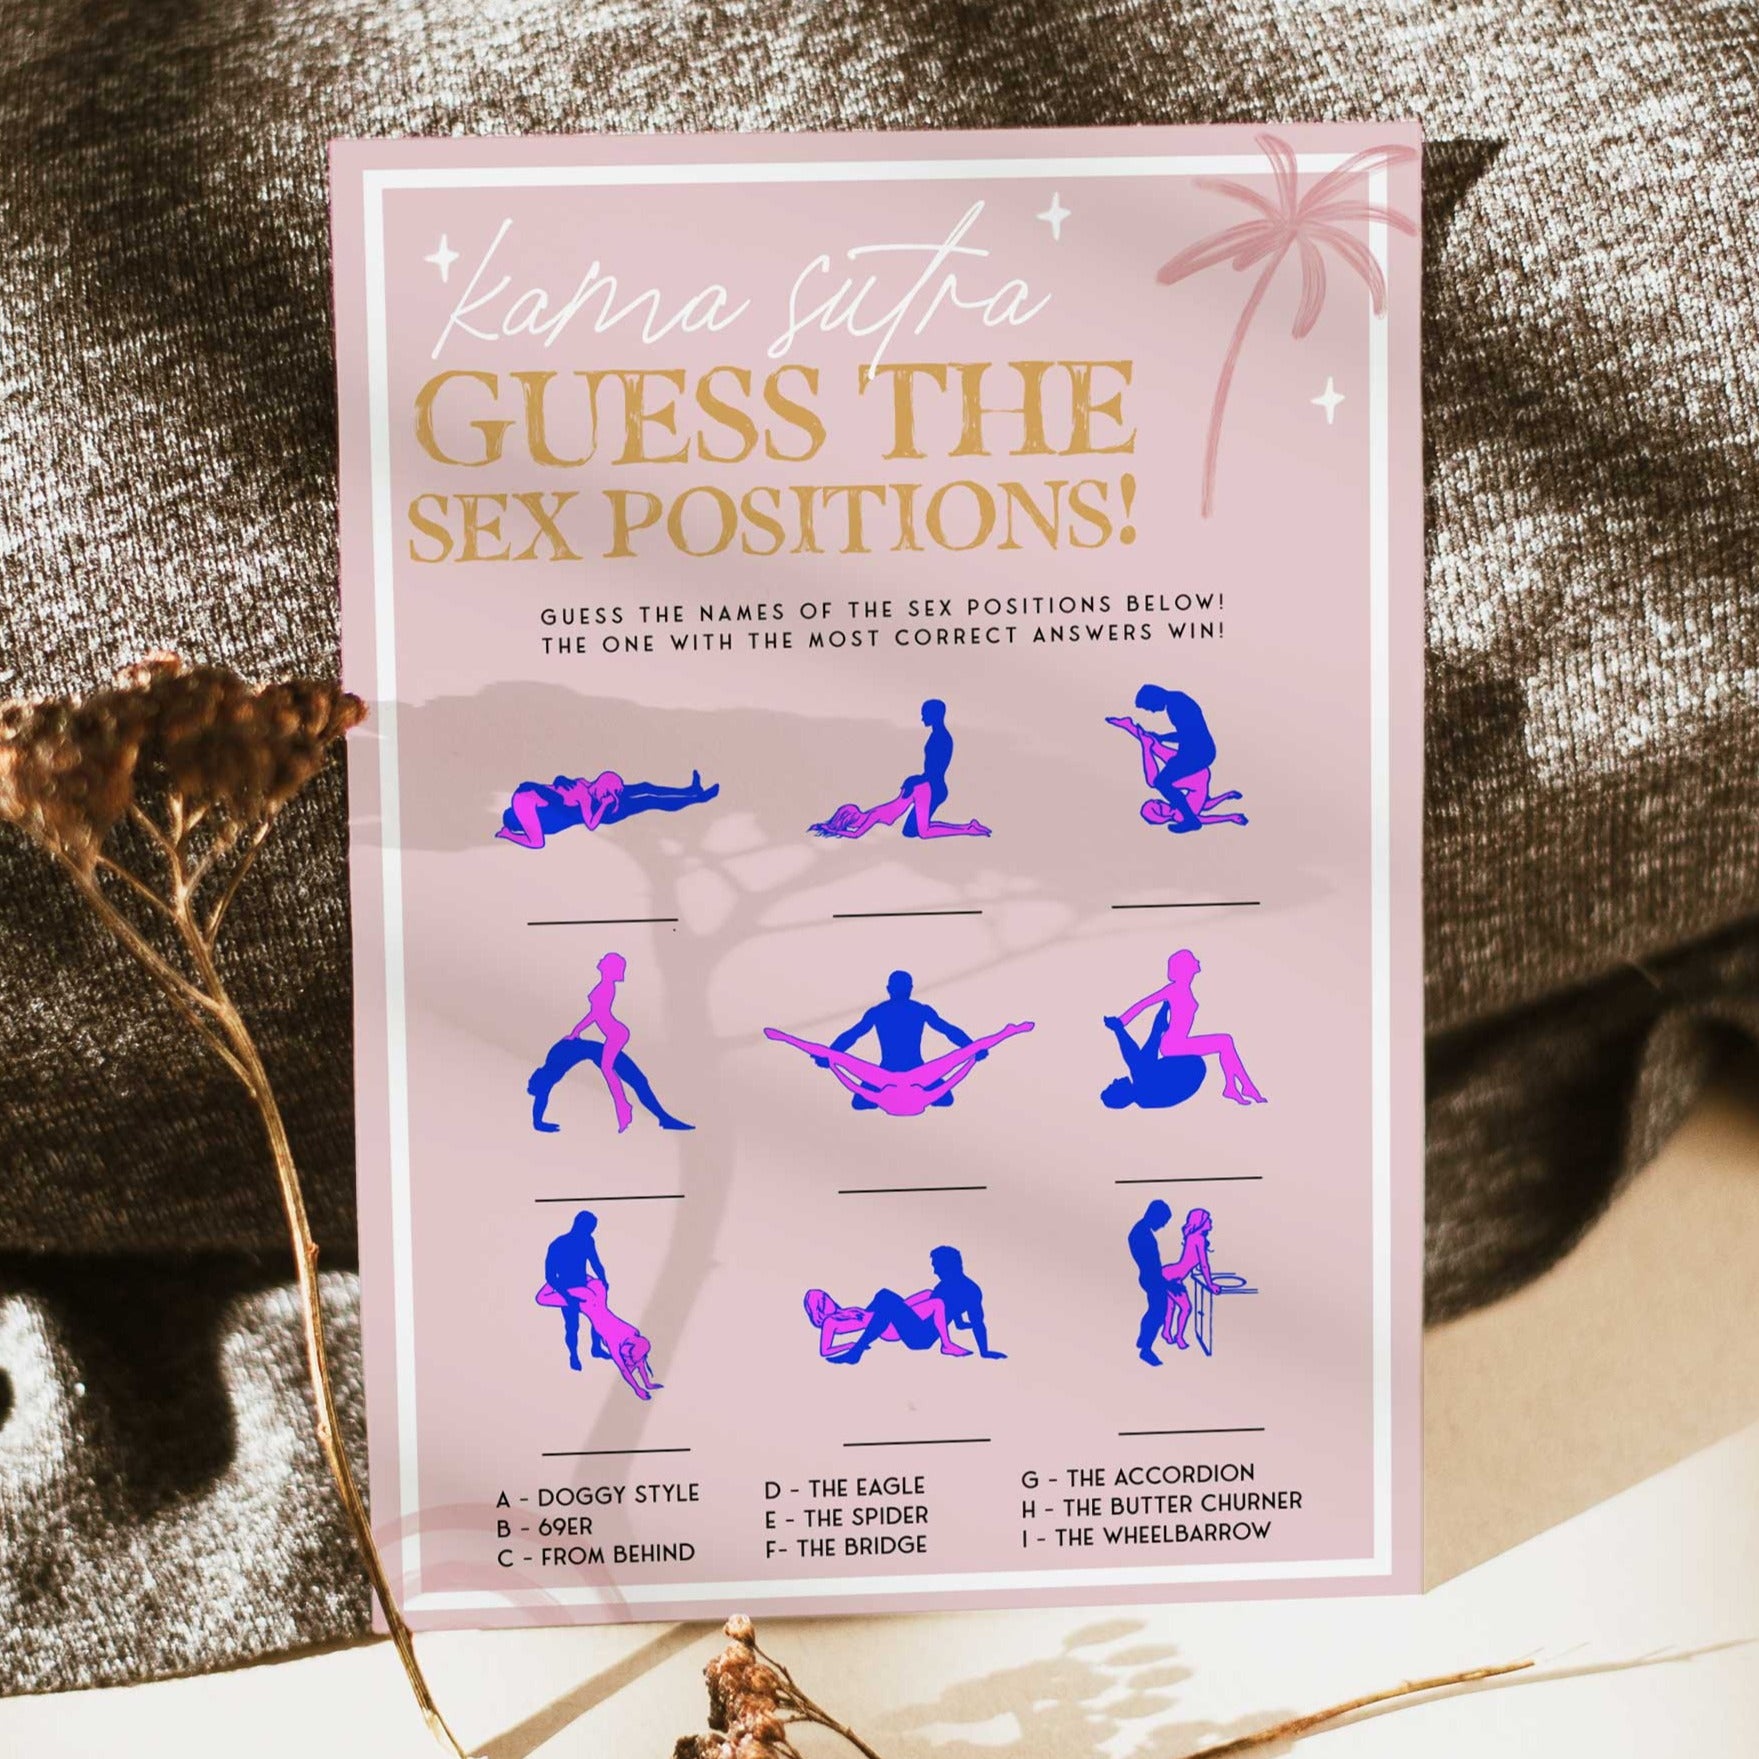 Fully editable and printable bridal shower name the sex positions game with a Palm Springs design. Perfect for a Palm Springs bridal shower themed party